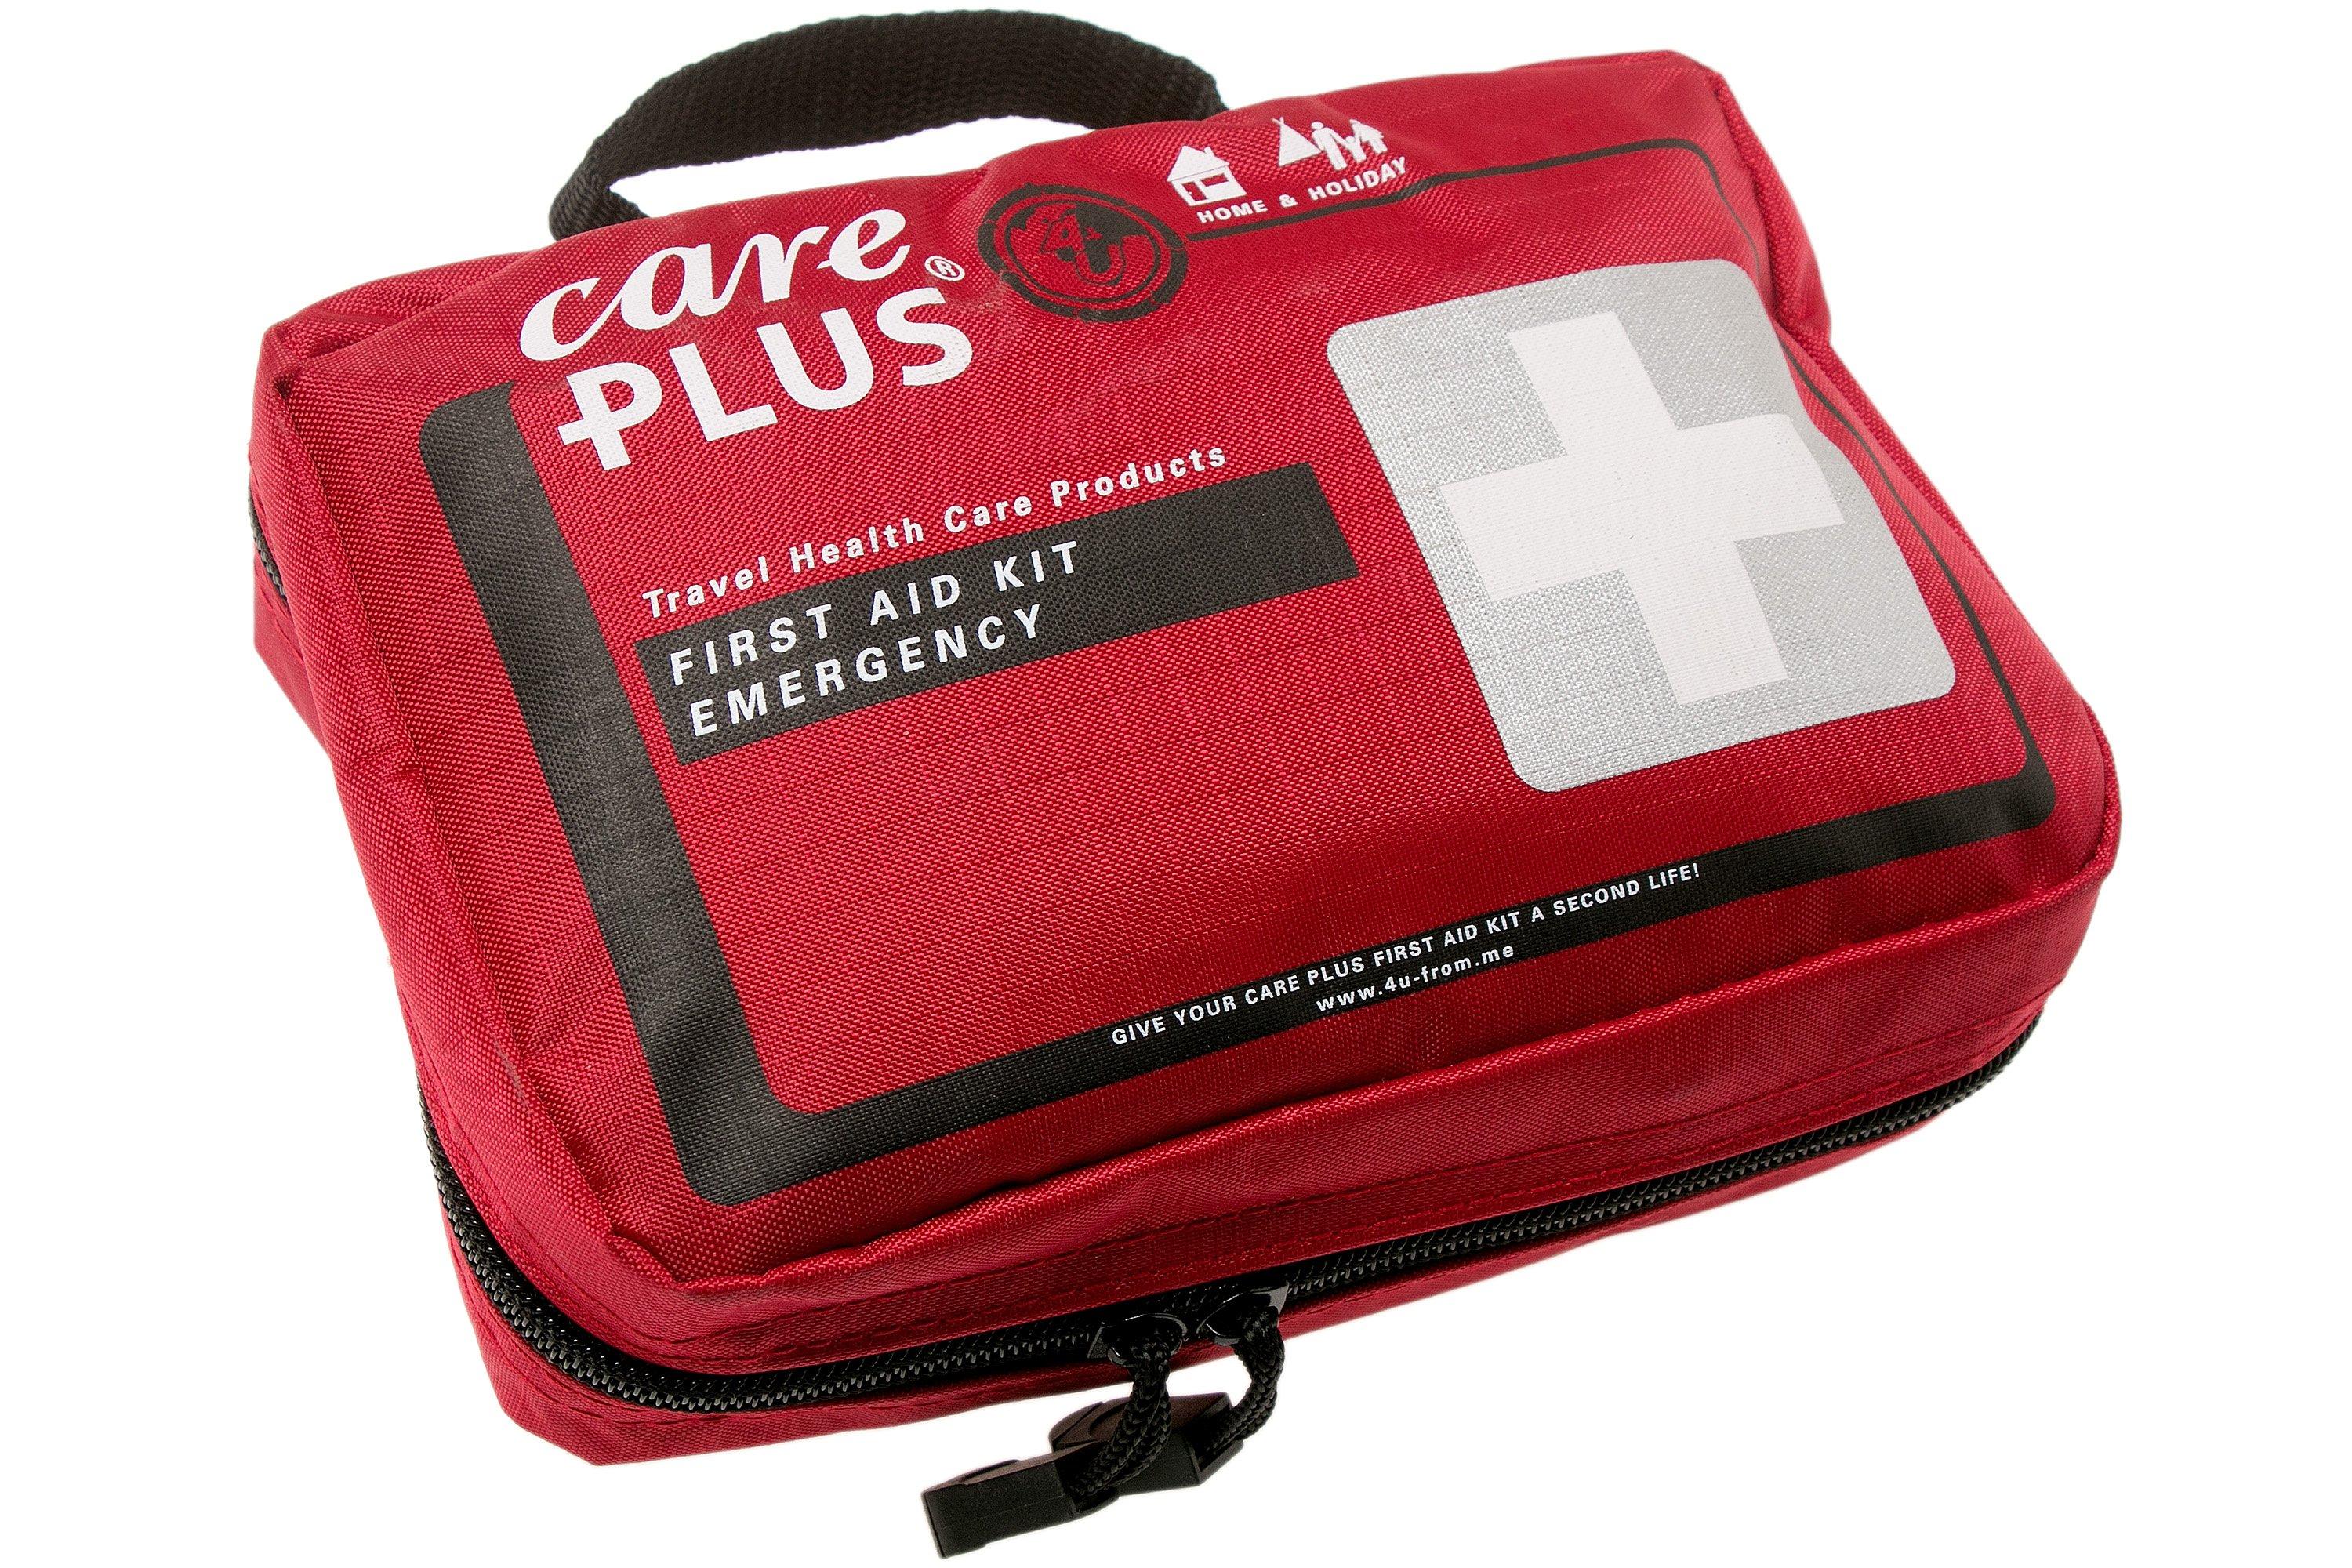 Care Plus First Aid Kit Compact Kit primo soccorso : Snowleader